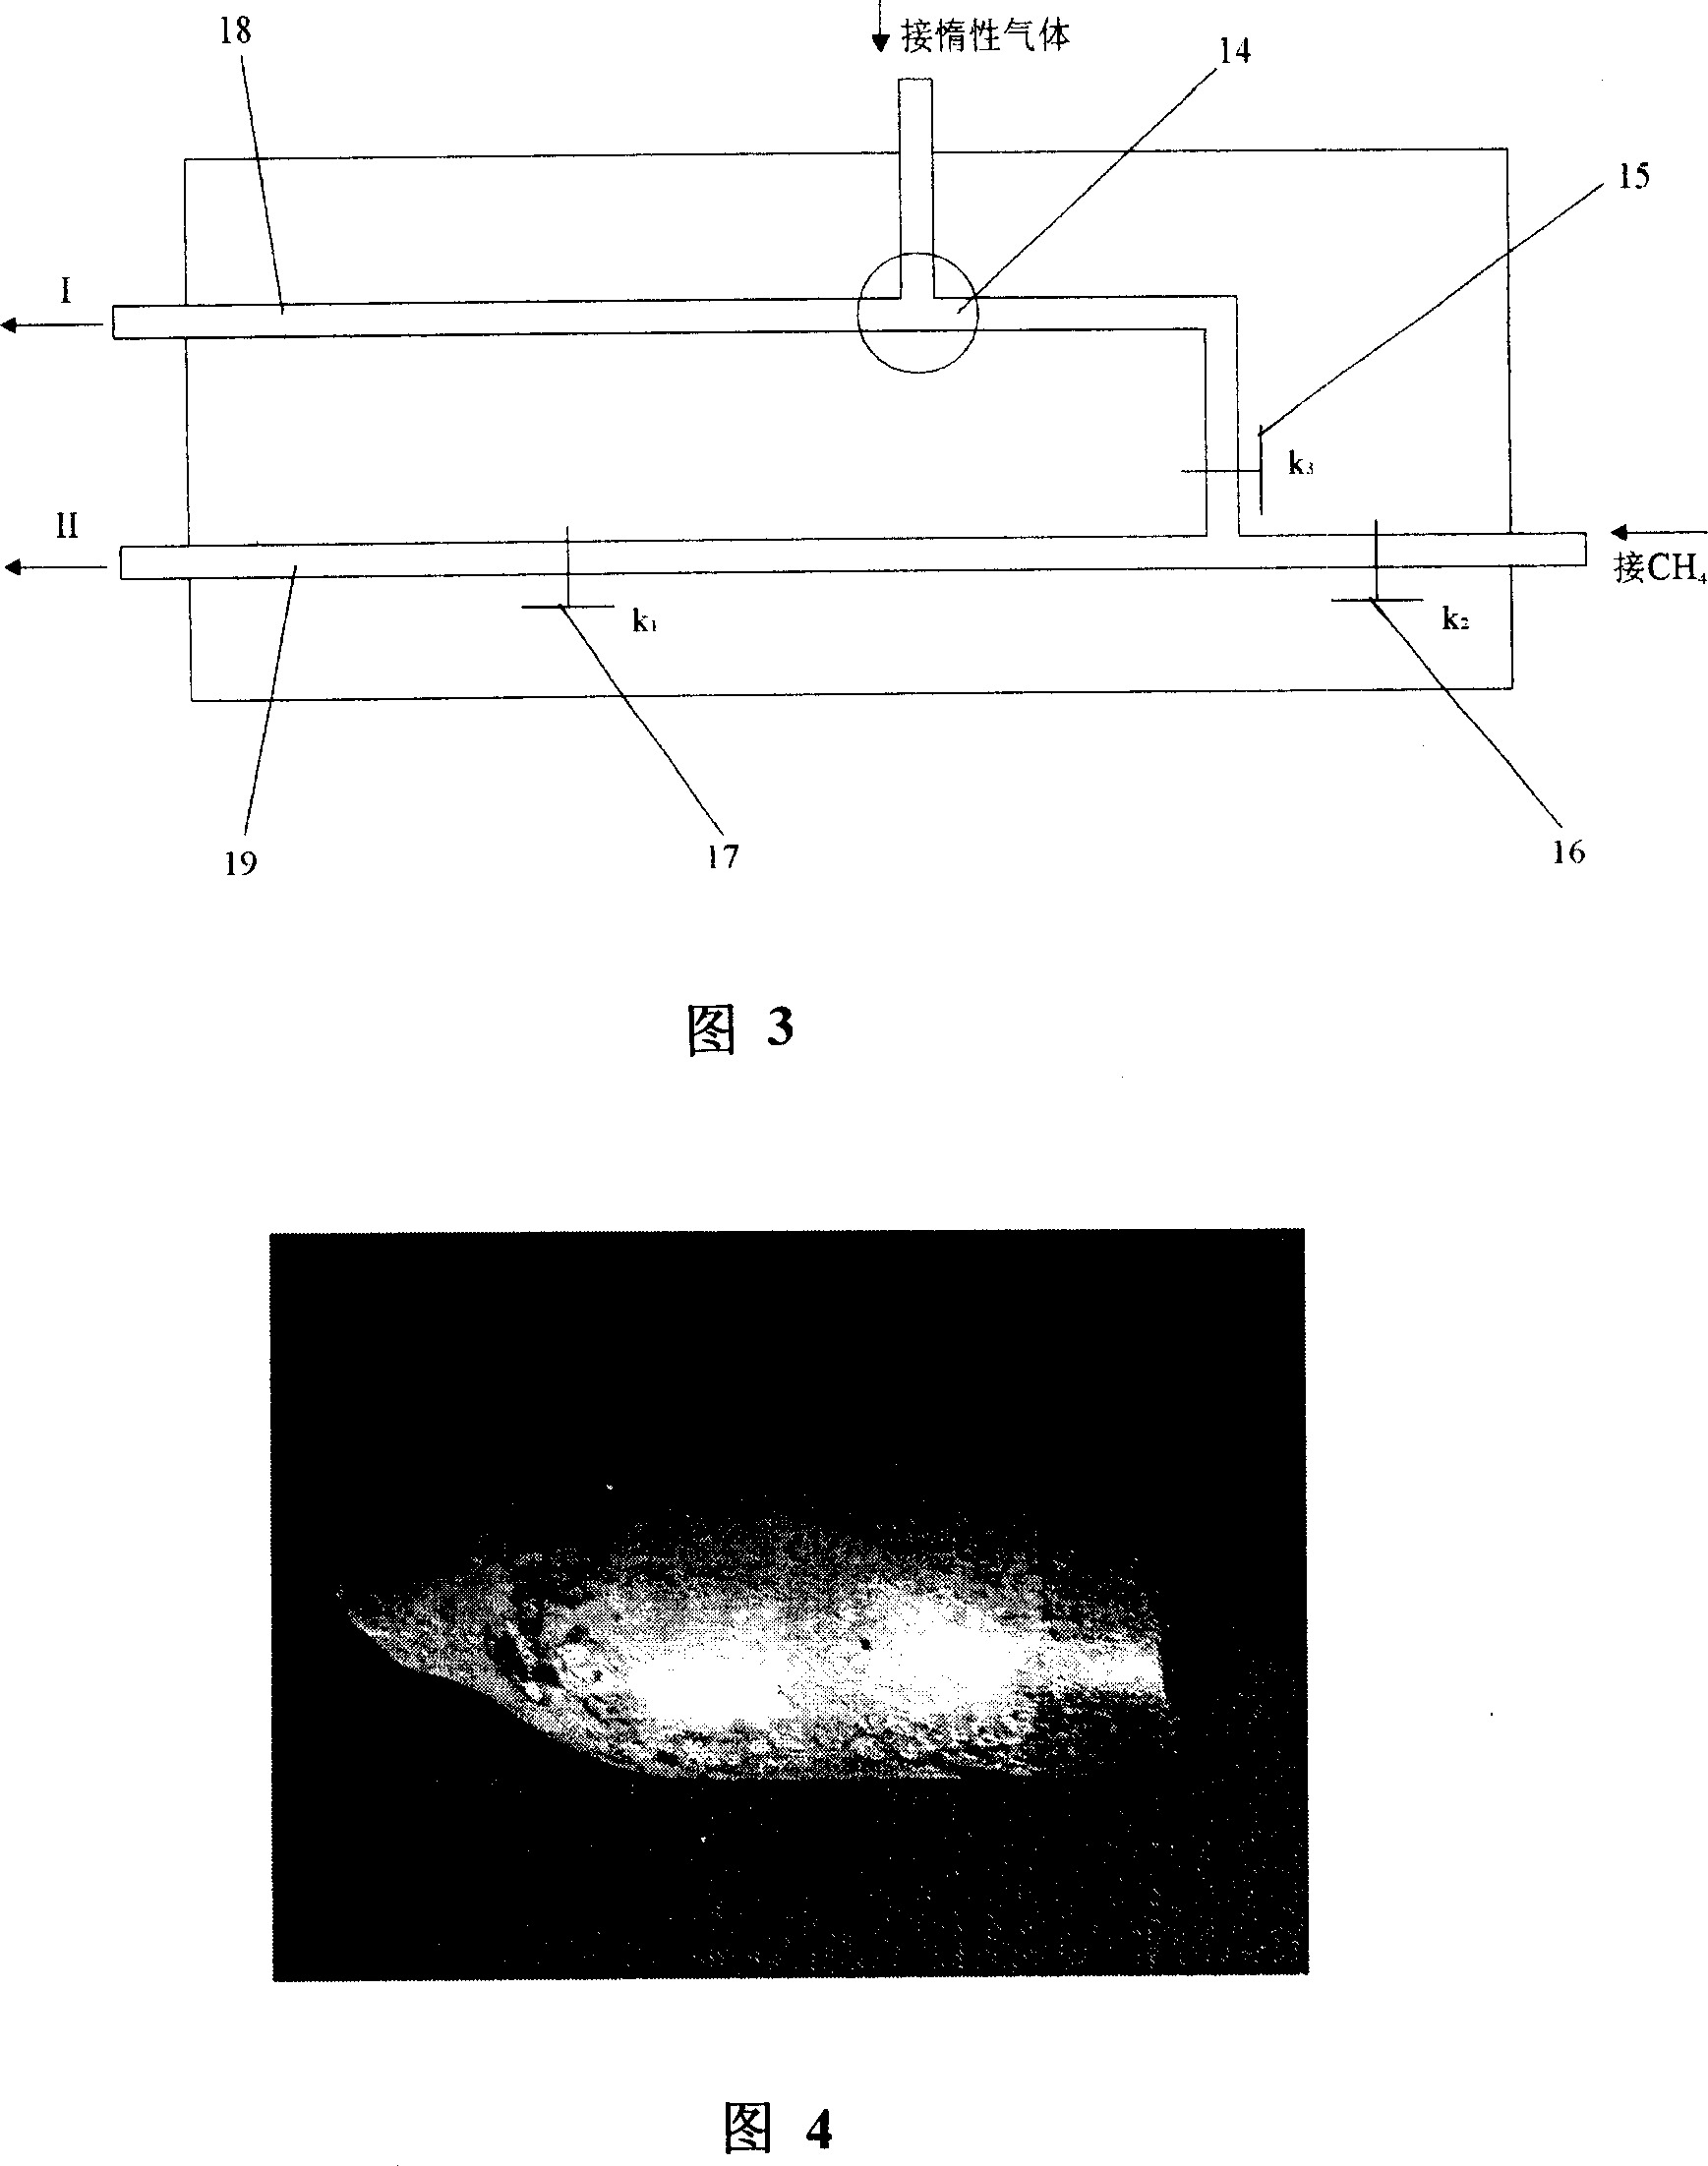 Carbon film coating method and device for quartz crucible for use in crystal growth